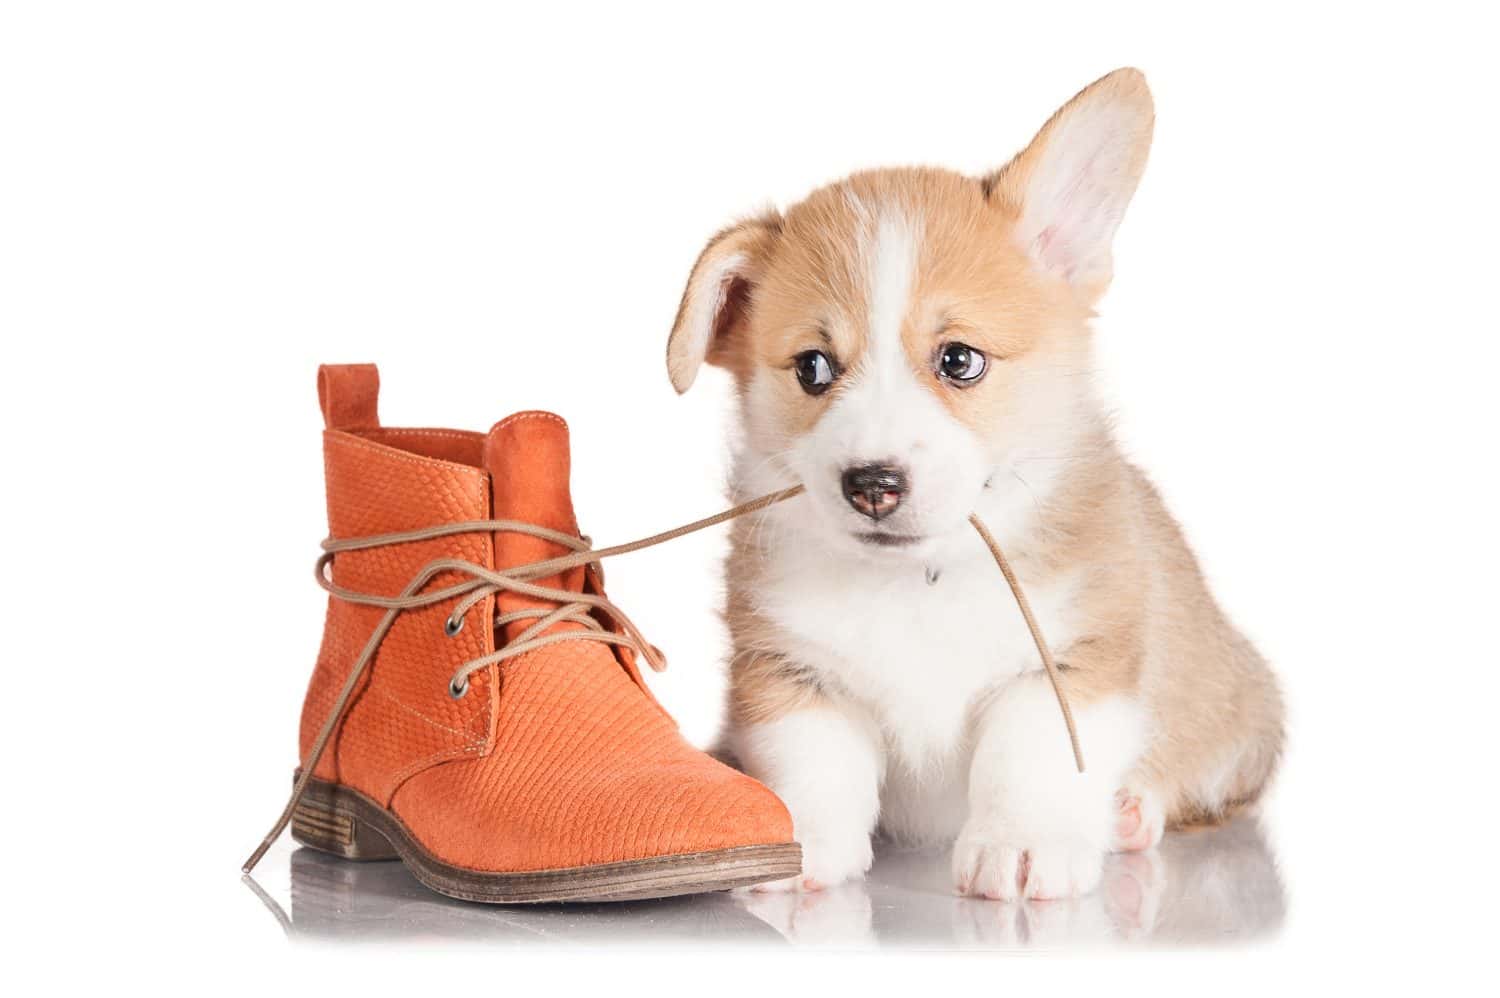 Puppy chewing on a shoe